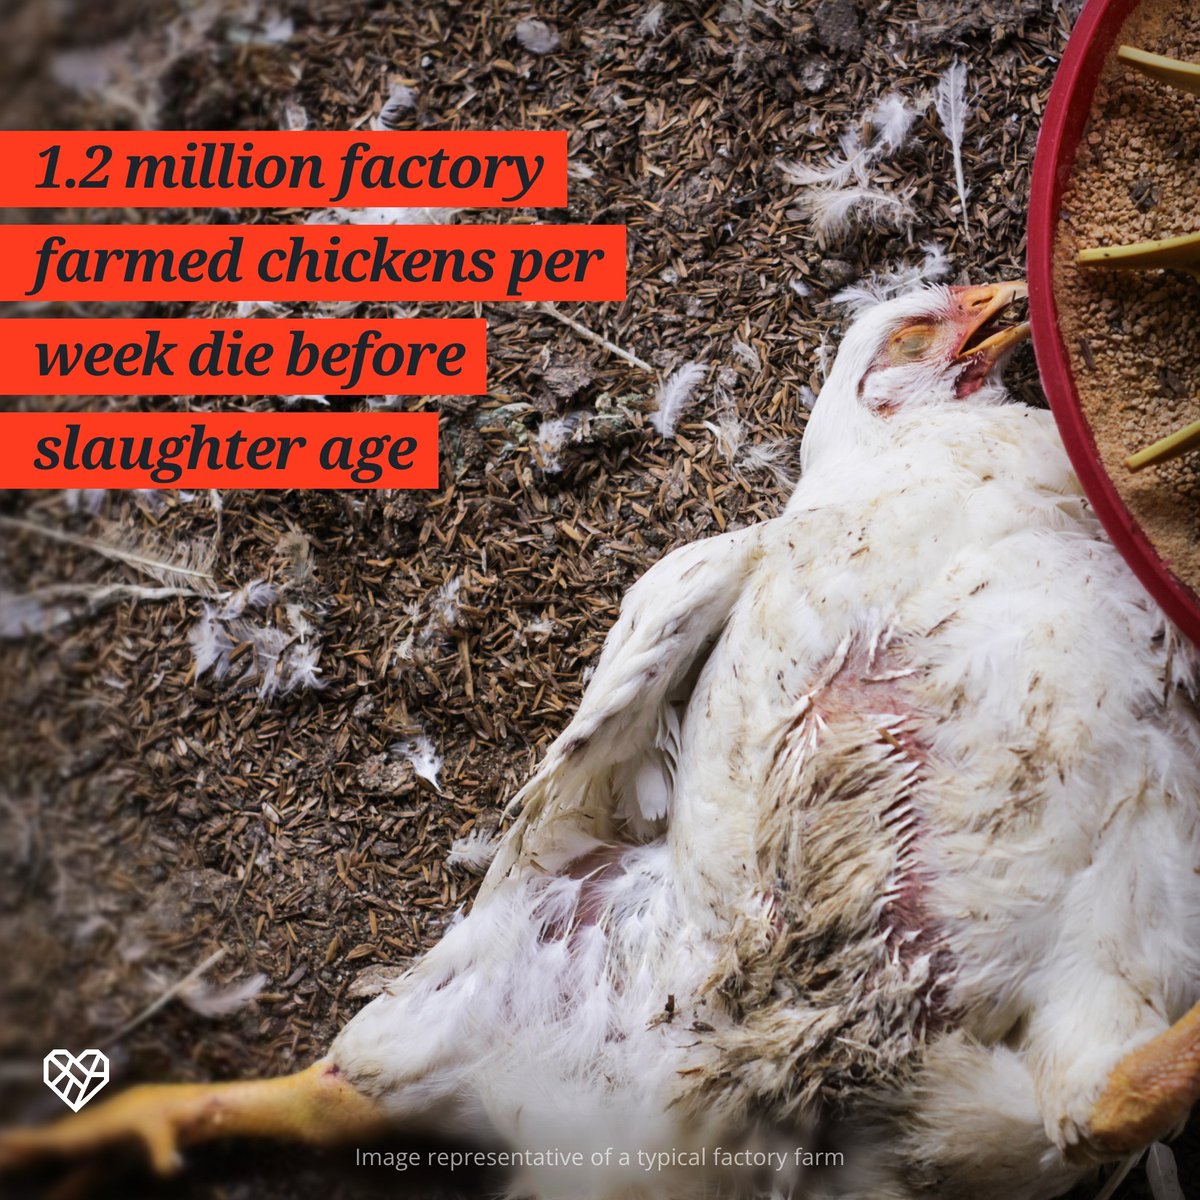 With fast-growing Frankenchickens having nearly double the mortality rate of slower-growing breeds, it's undeniable that our current food system is not only cruel, it's unsustainable. #foodwasteactionweek